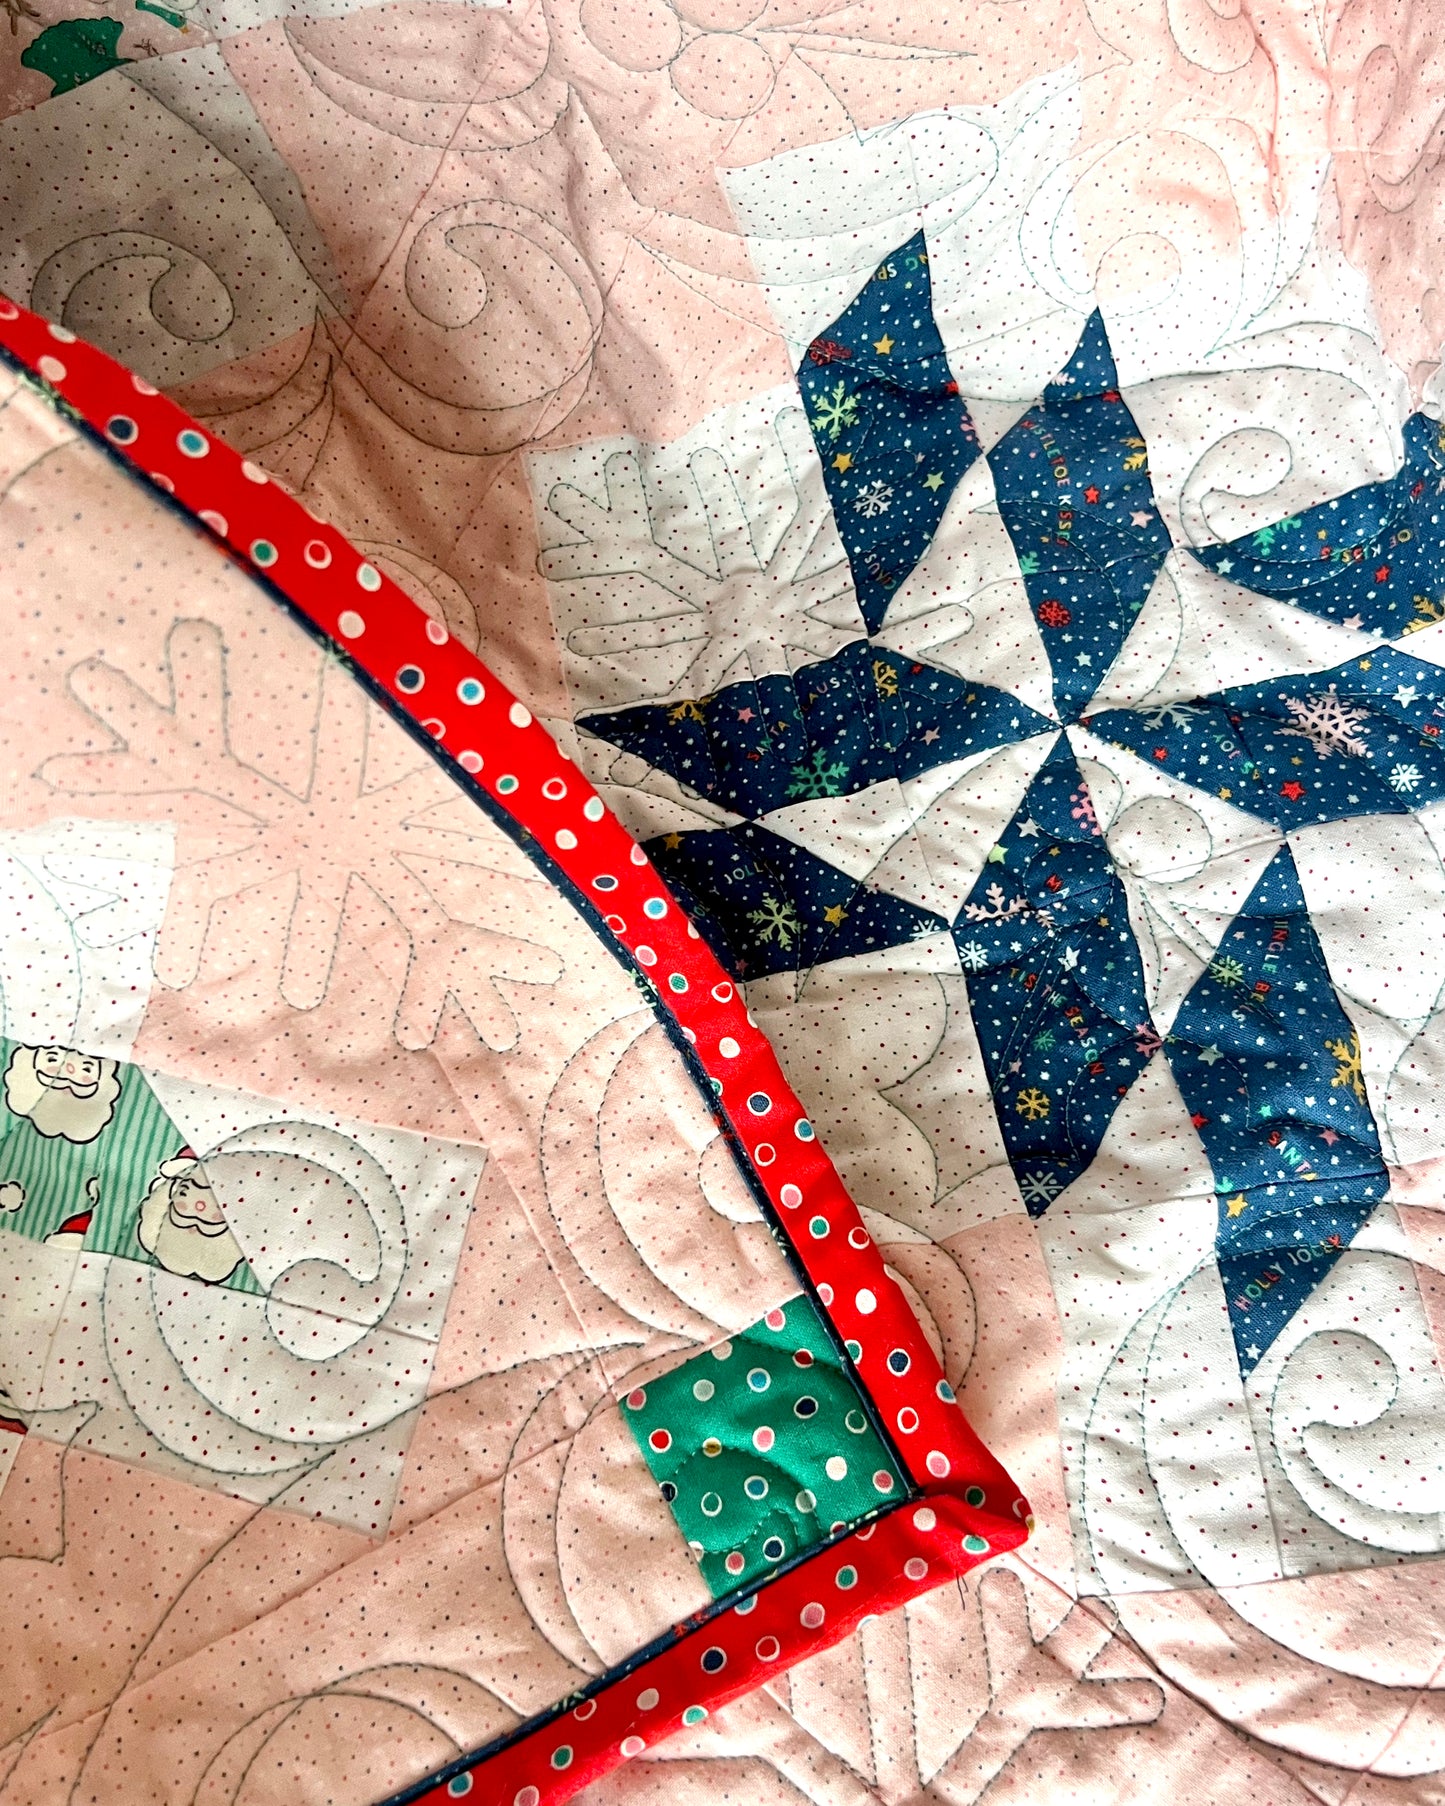 Snowflake Heaven Quilt Pattern, for the Oh What Fun Collection